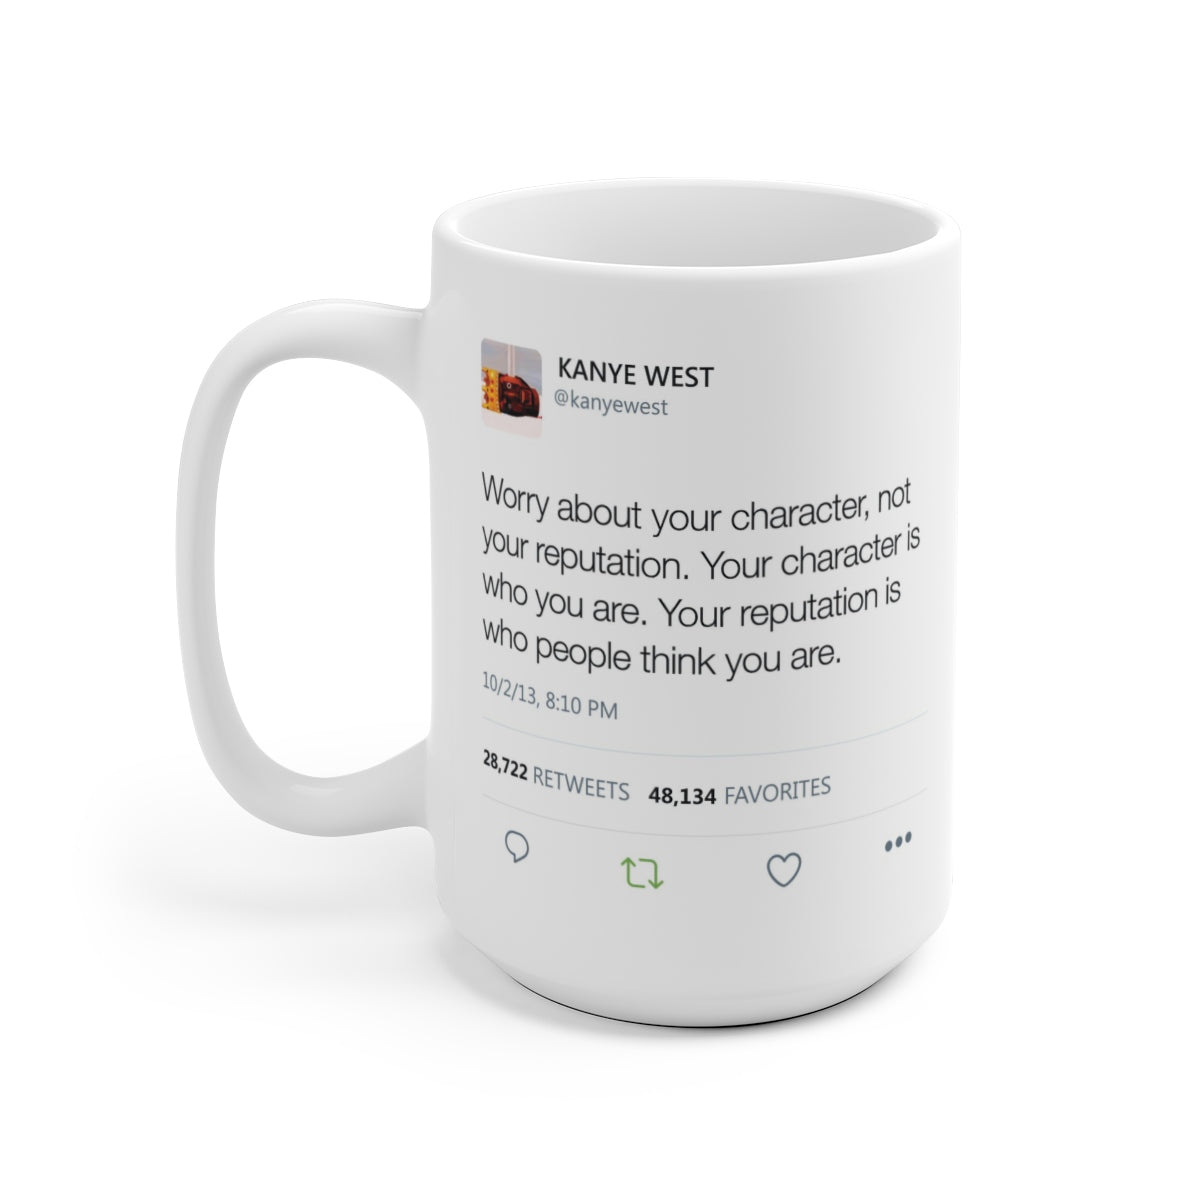 Worry about your character, not your reputation - Kanye West Tweet Mug-Archethype